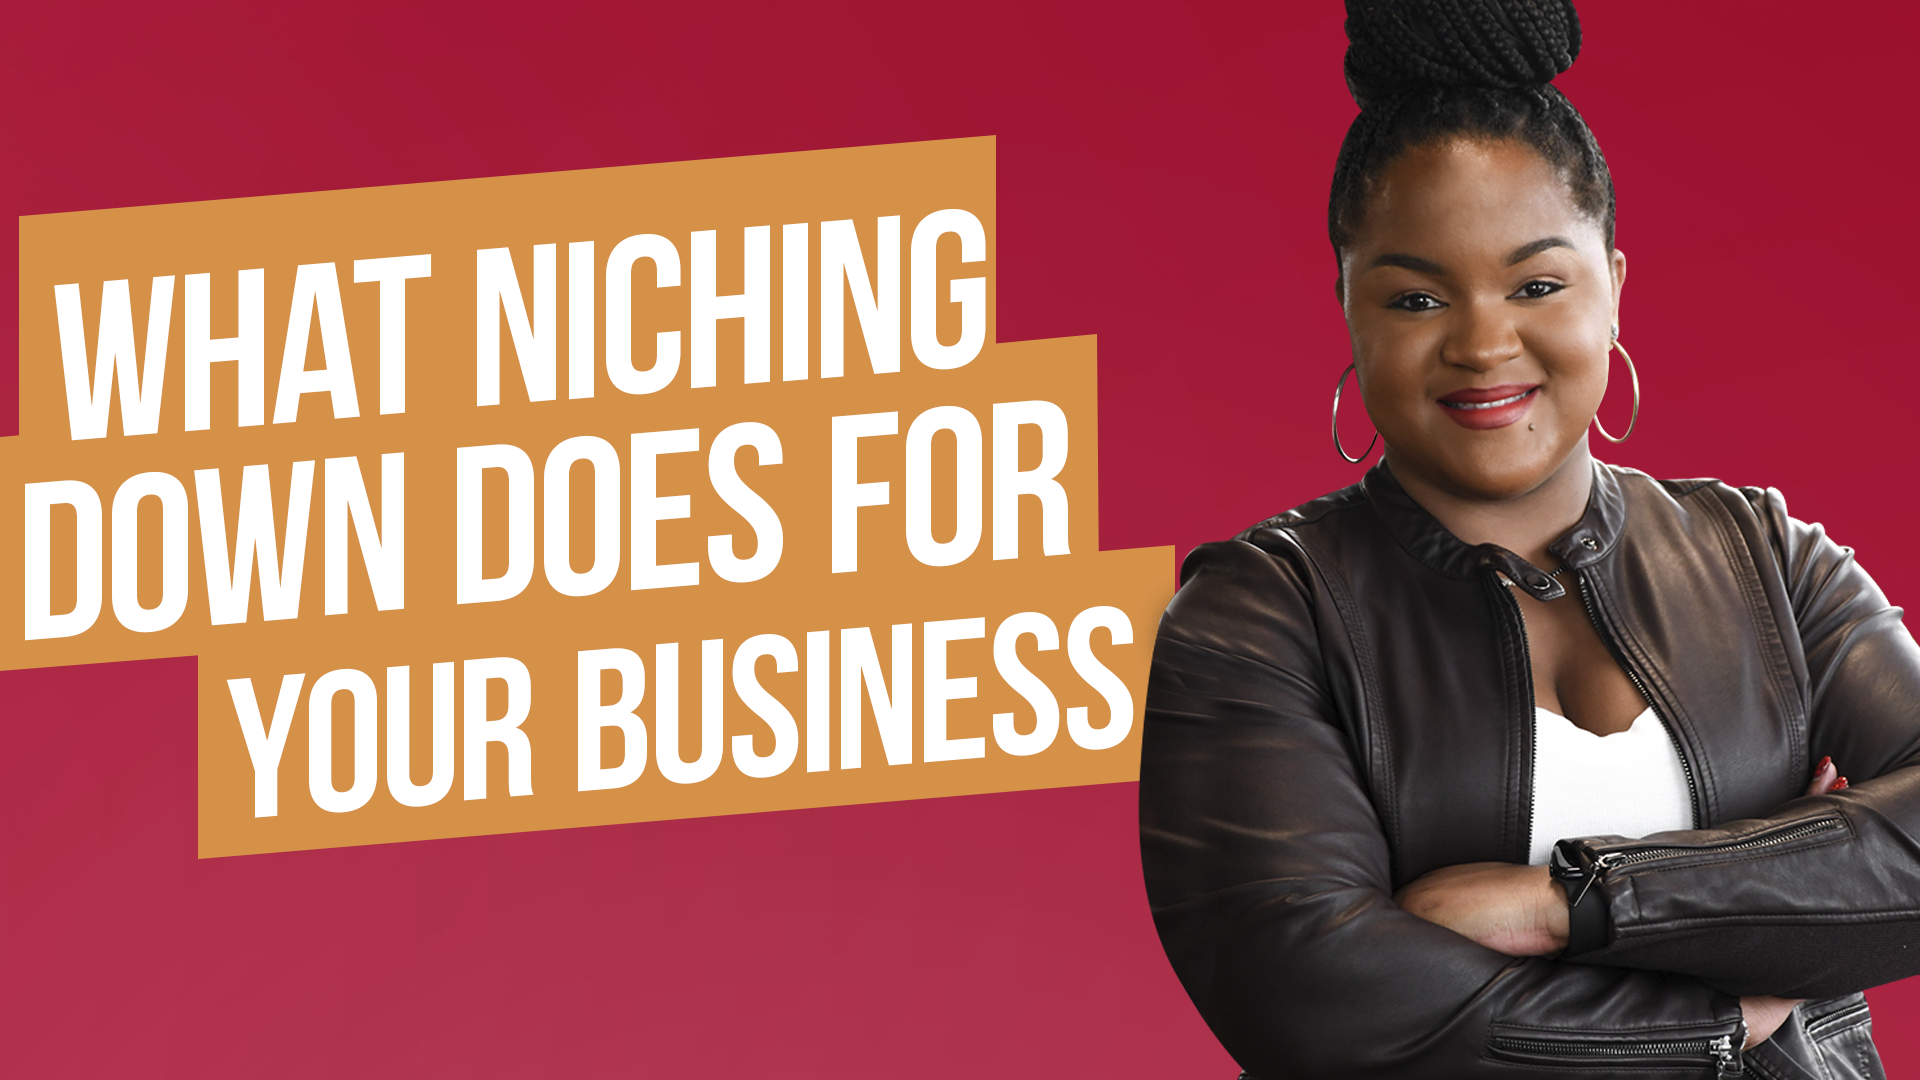 Episode #6: What Niching Down Does For Your Business – 5 Reasons to Consider